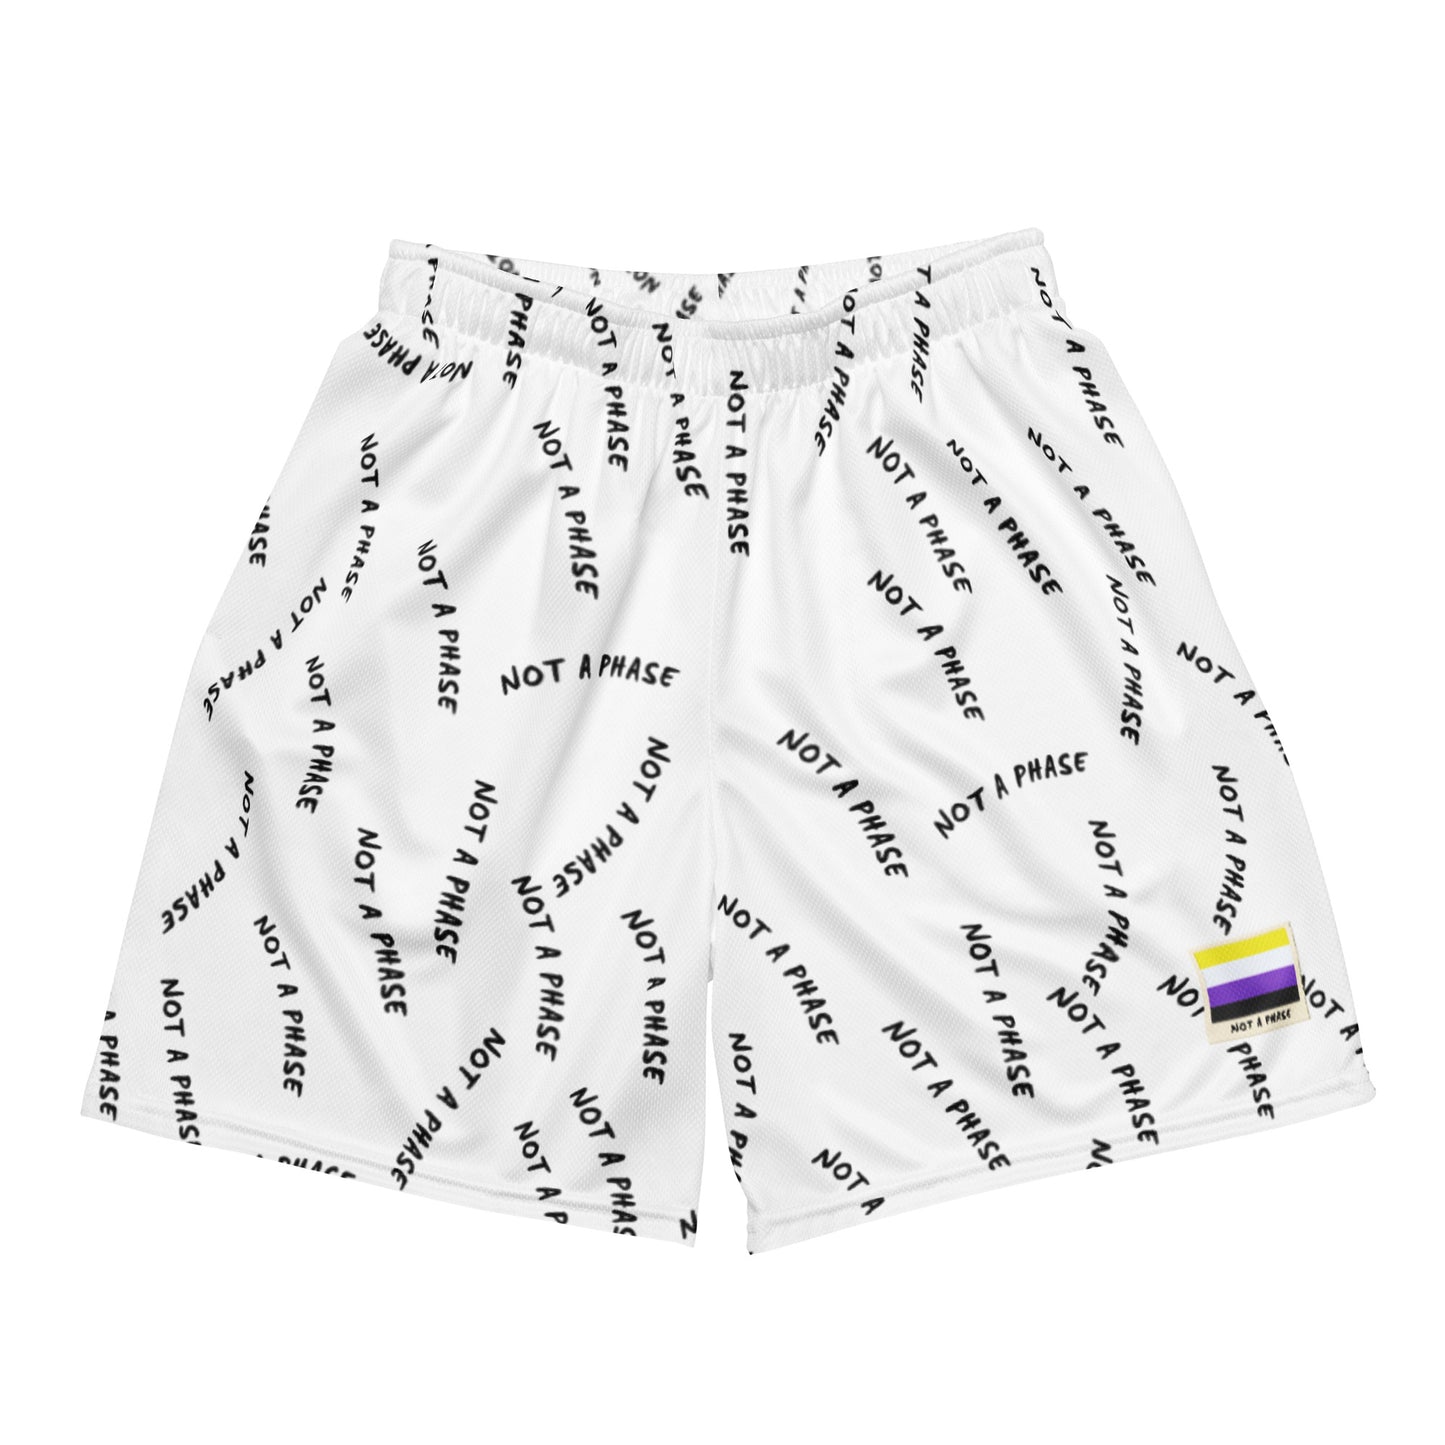 Not A Phase Non-binary Pride shorts - Rose Gold Co. Shop